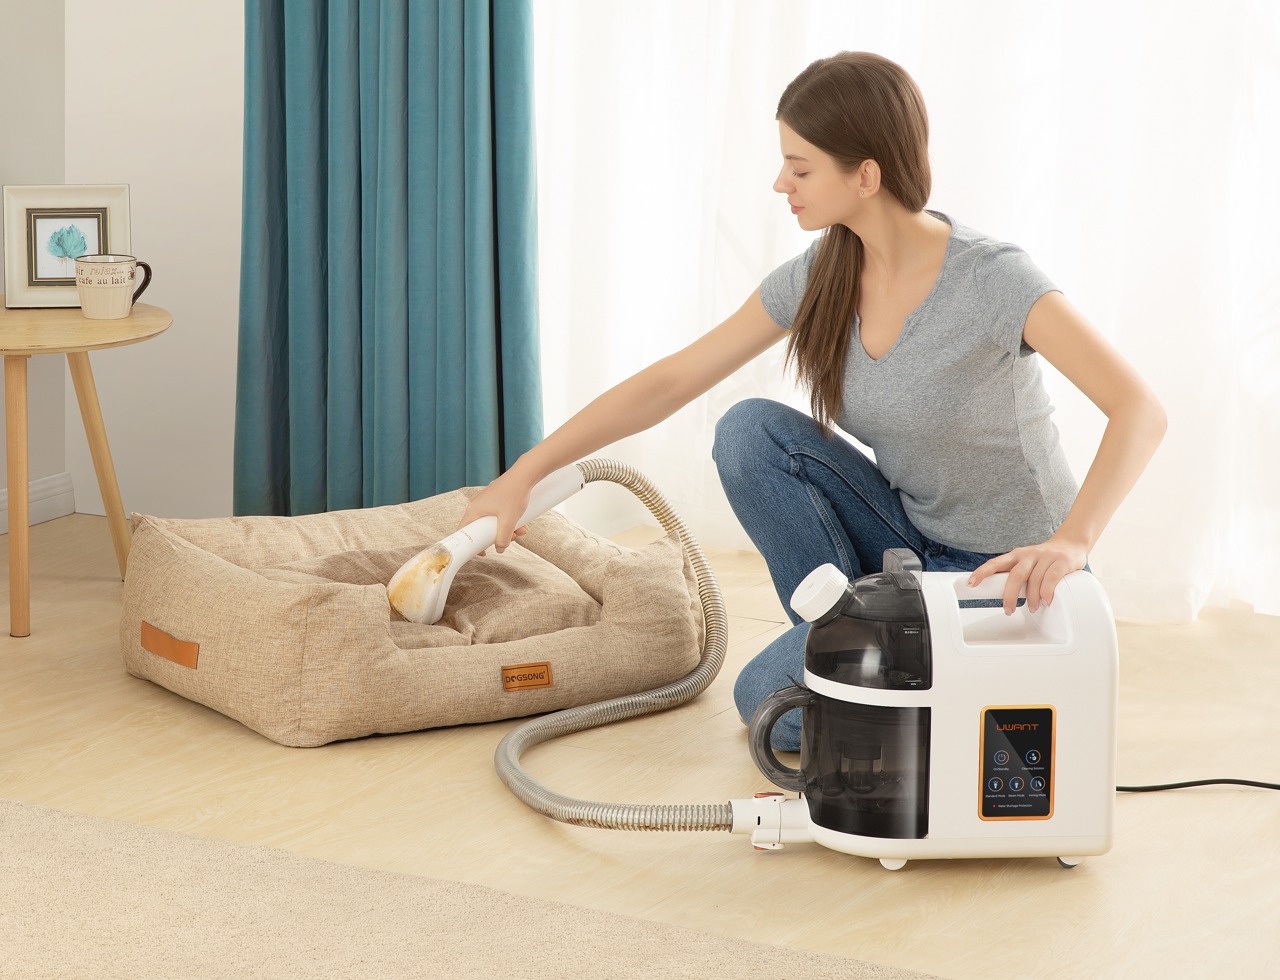 This high-temperature steam + vacuum spot cleaner can literally keep your sofa, rug, and house spotless